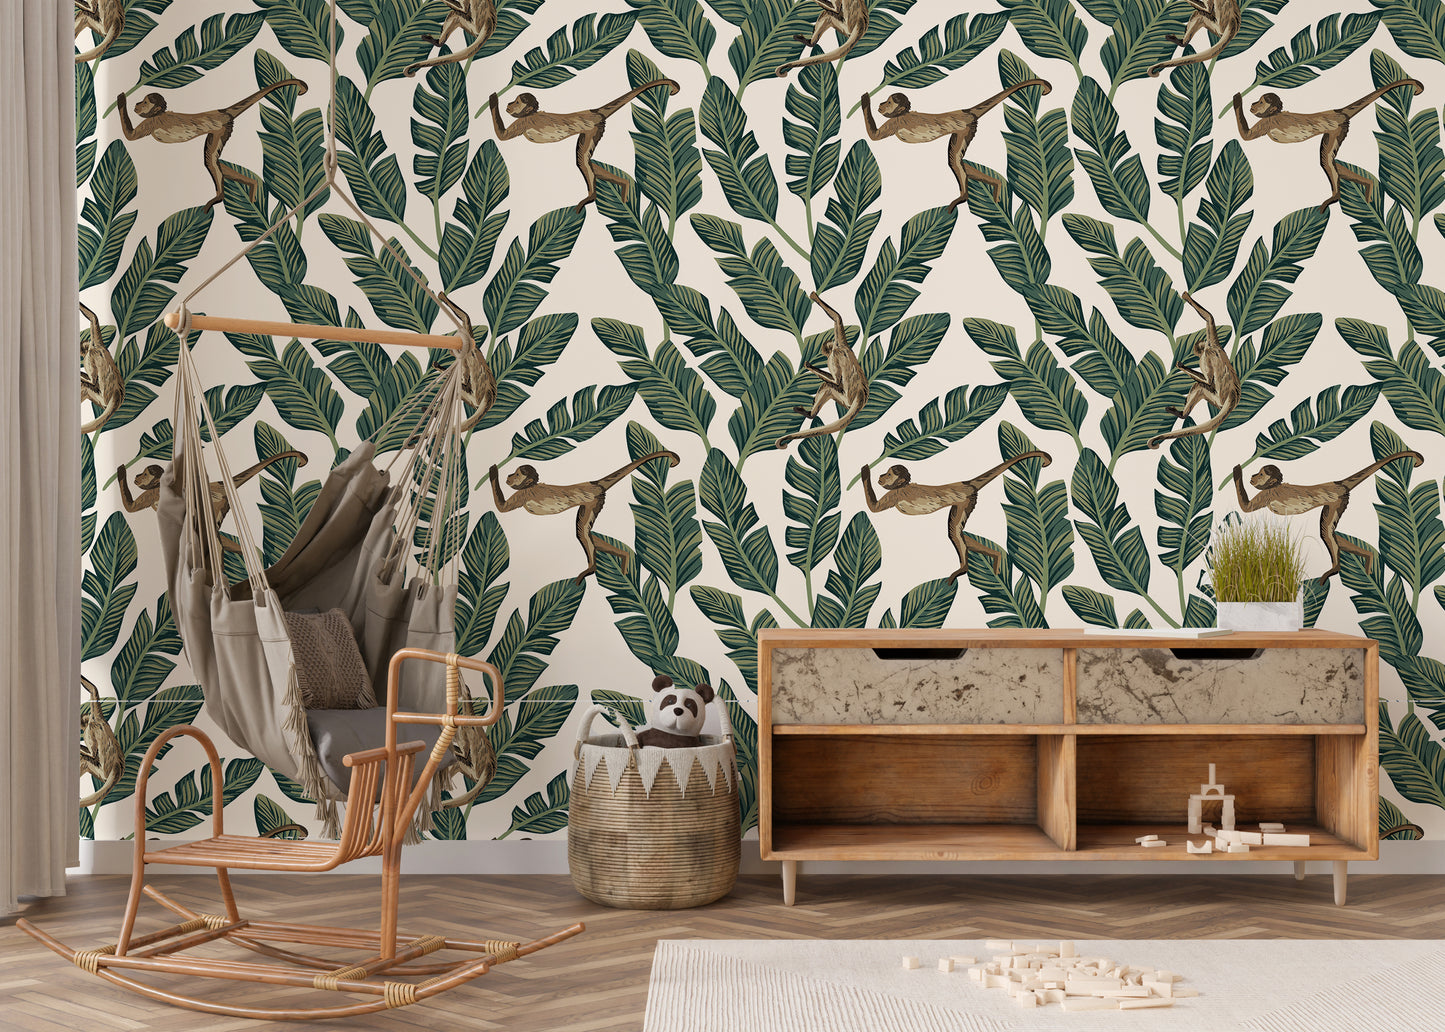 Monkey Business Removable Peel And Stick Wallpaper